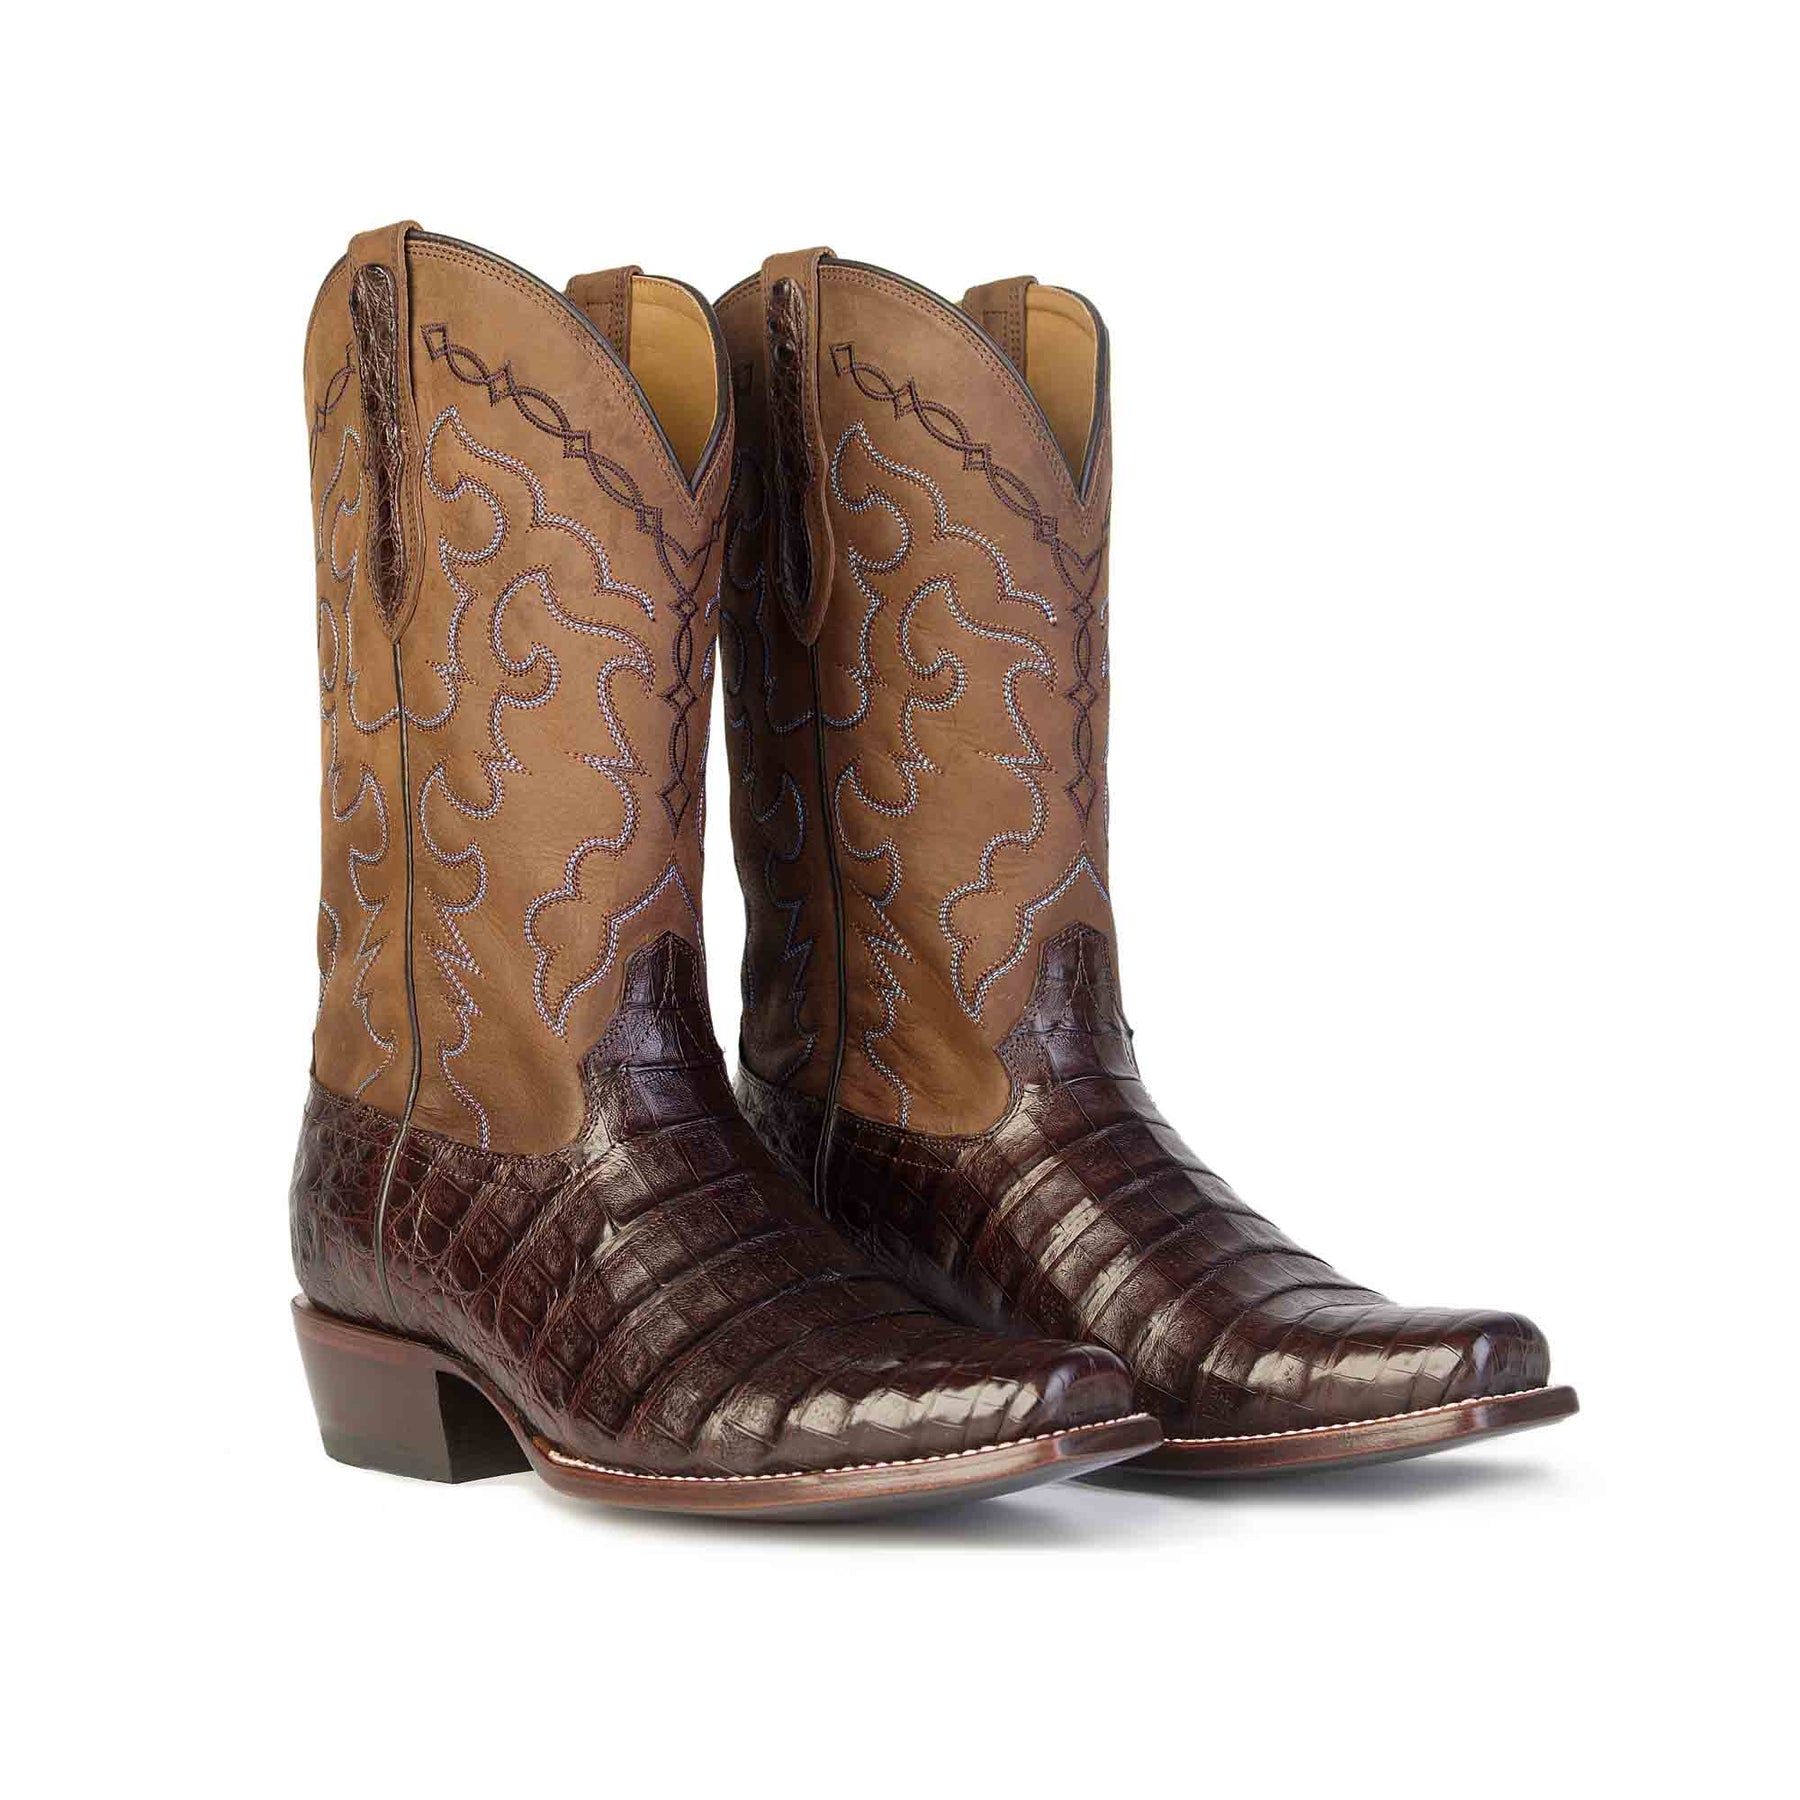 Men's Caiman Belly Western Boots | The Trace | 7-Toe